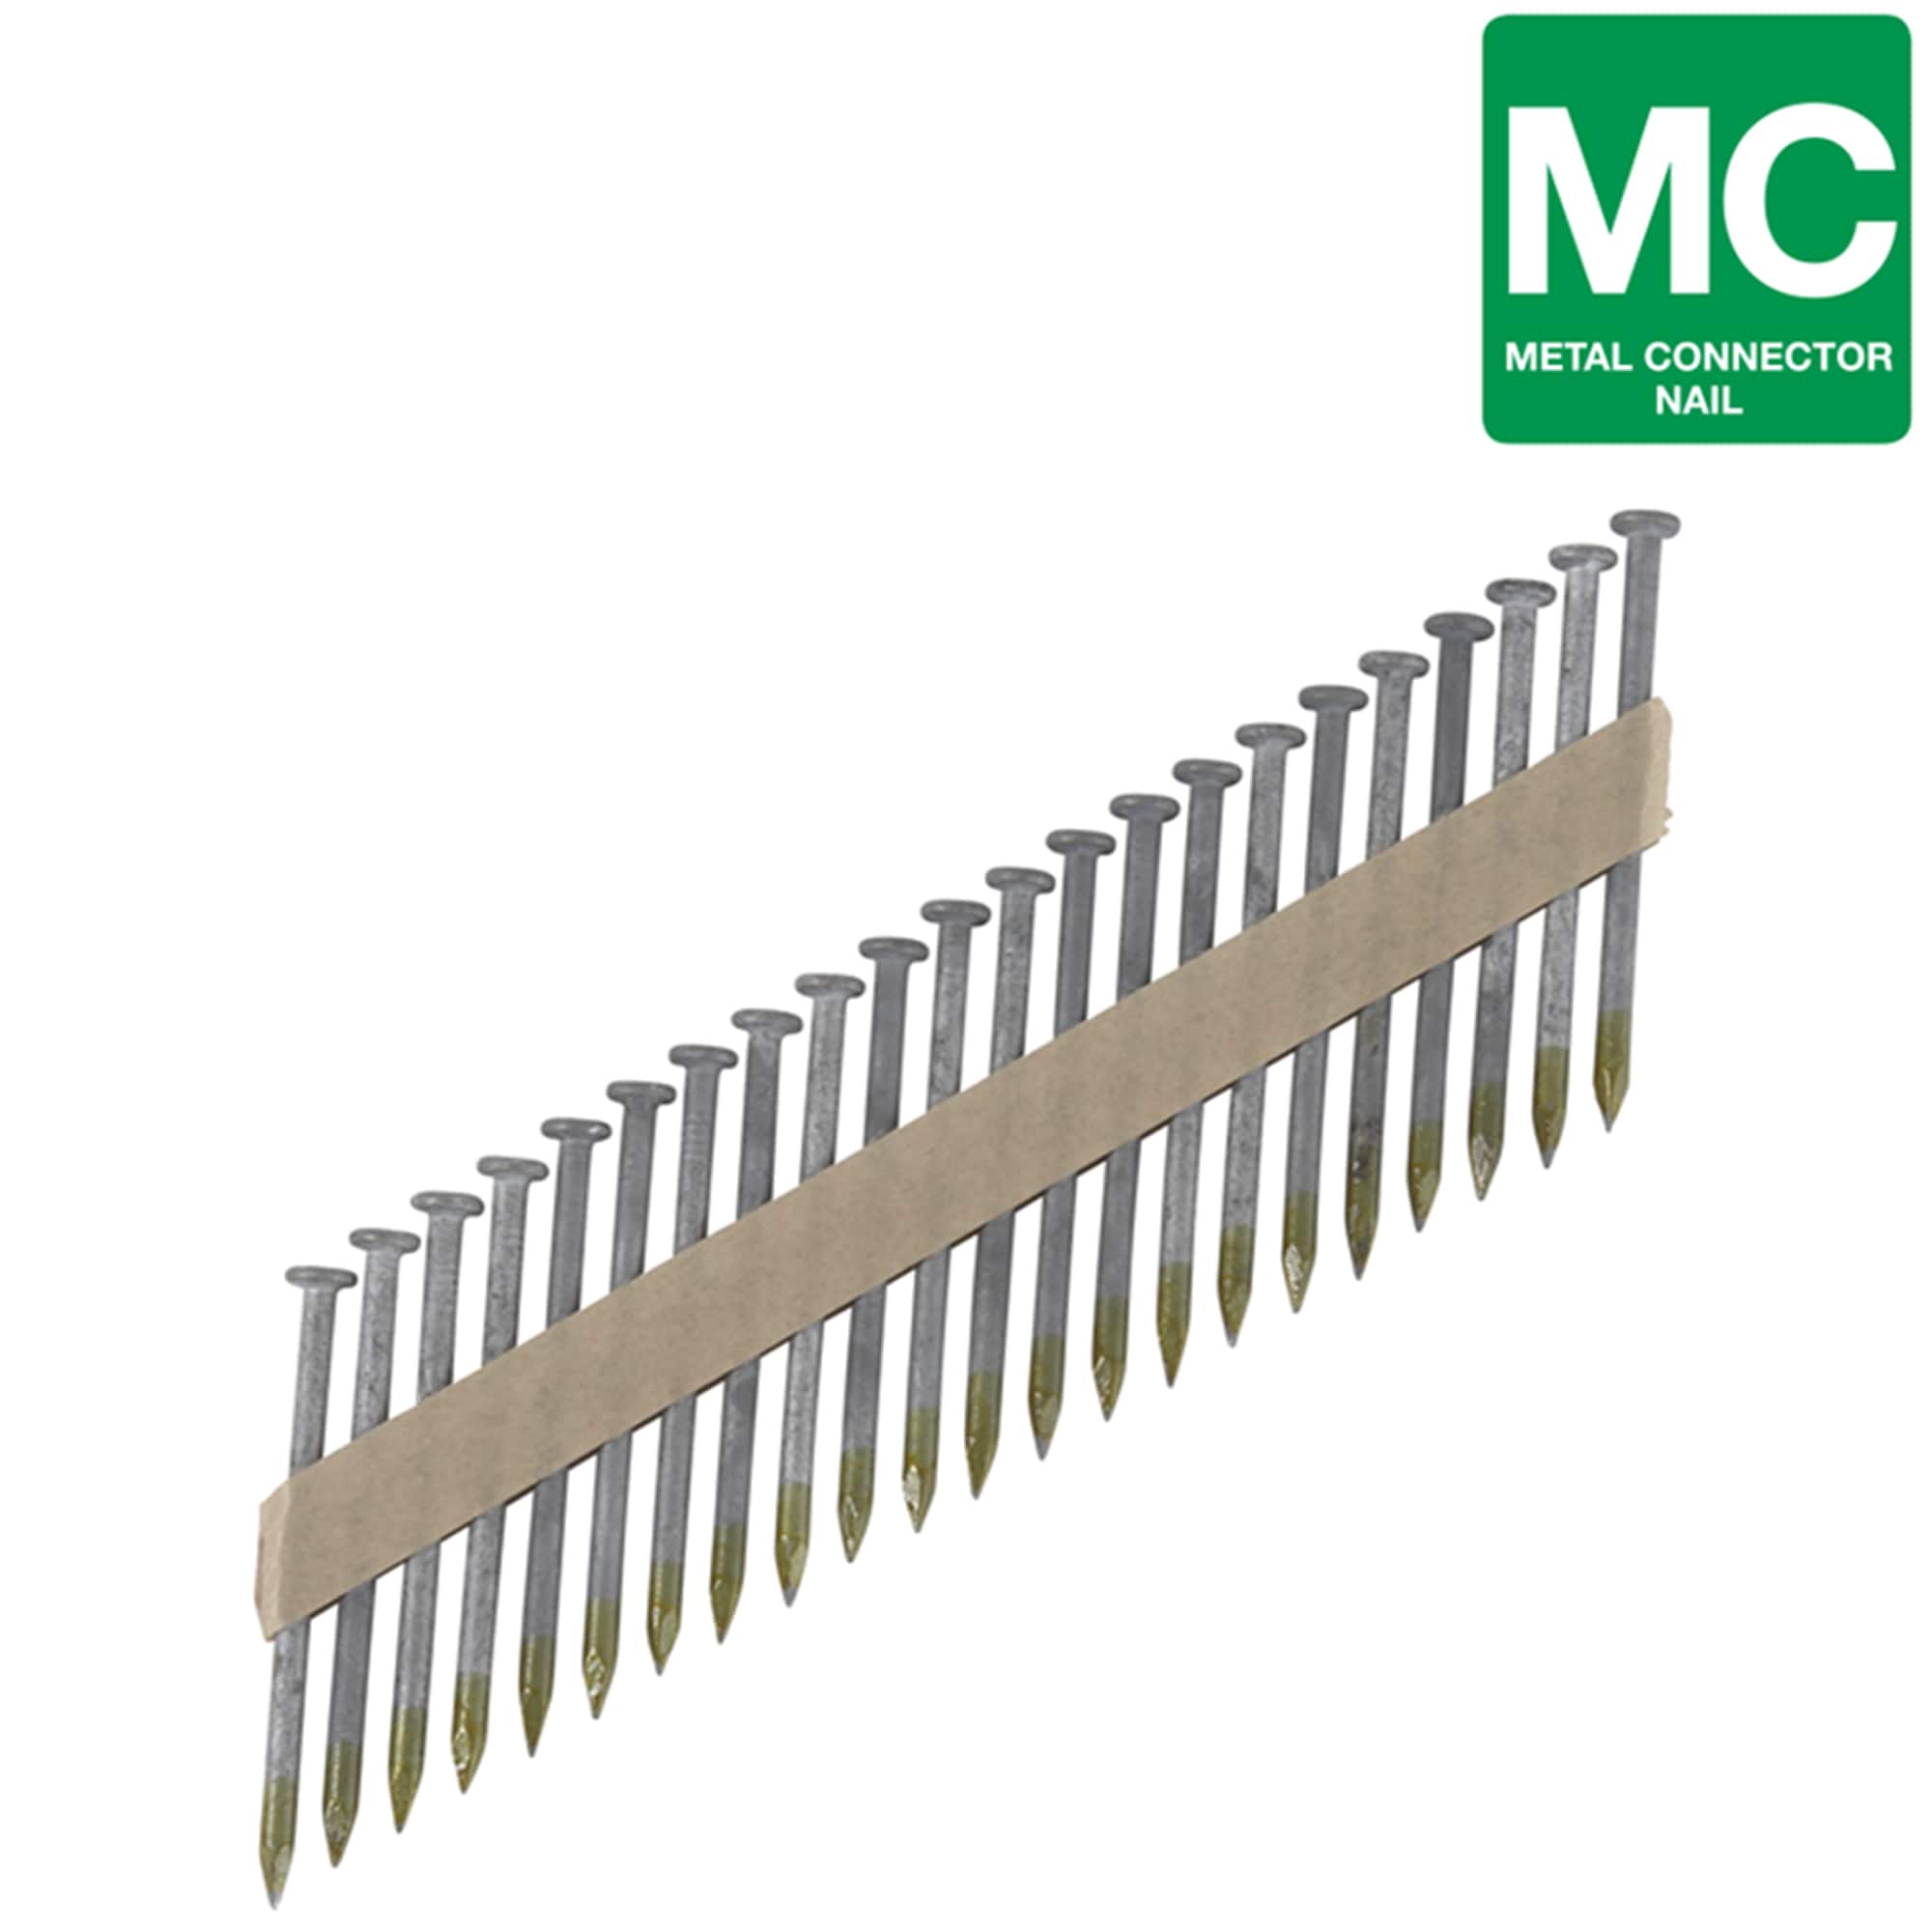 Metabo HPT 1-1/2-in x 0.148-in 30 Degree Electro-Galvanized Smooth Joist Hanger Nails (1000-Per Box)